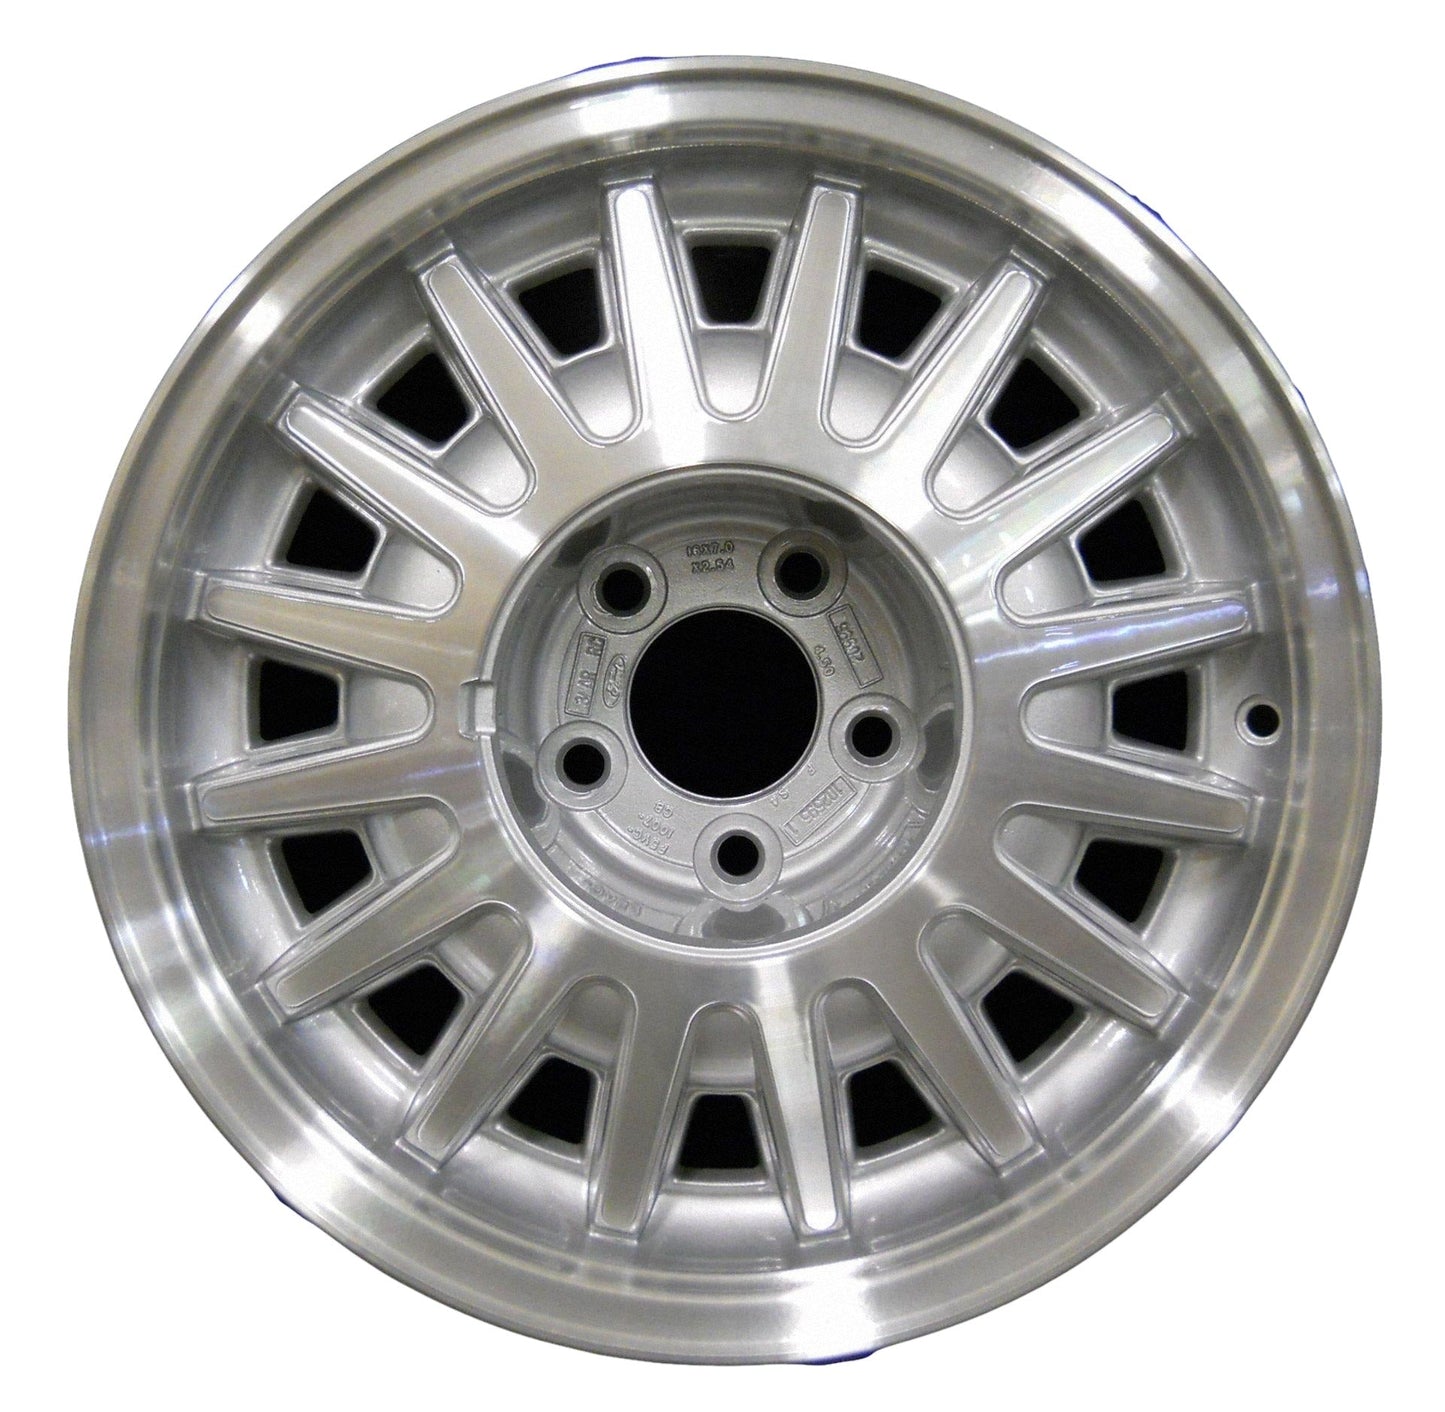 Lincoln Town Car  1995, 1996, 1997 Factory OEM Car Wheel Size 16x7 Alloy WAO.3126.PS02.MA